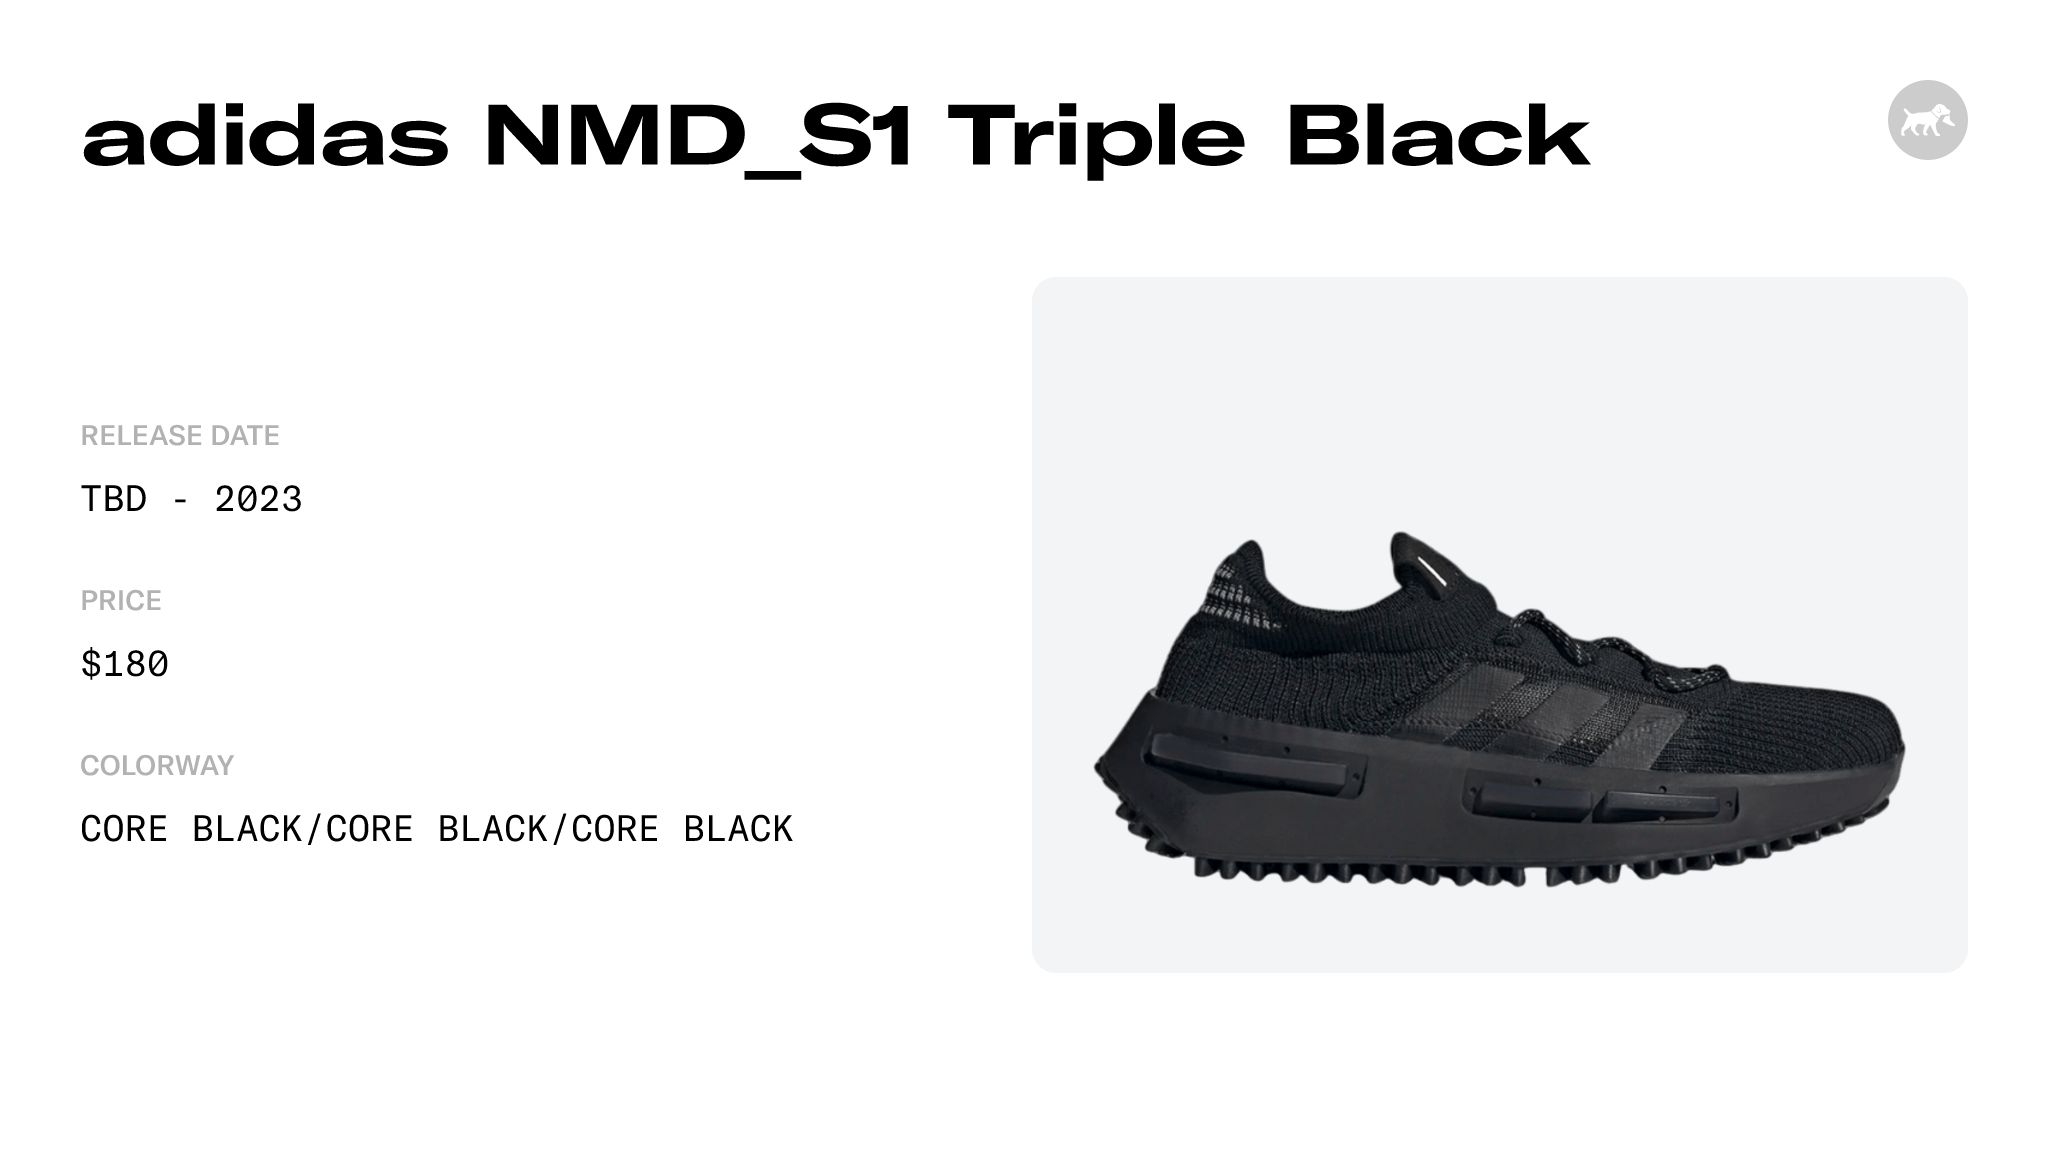 adidas NMD_S1 Triple Black - FZ6381 Raffles and Release Date